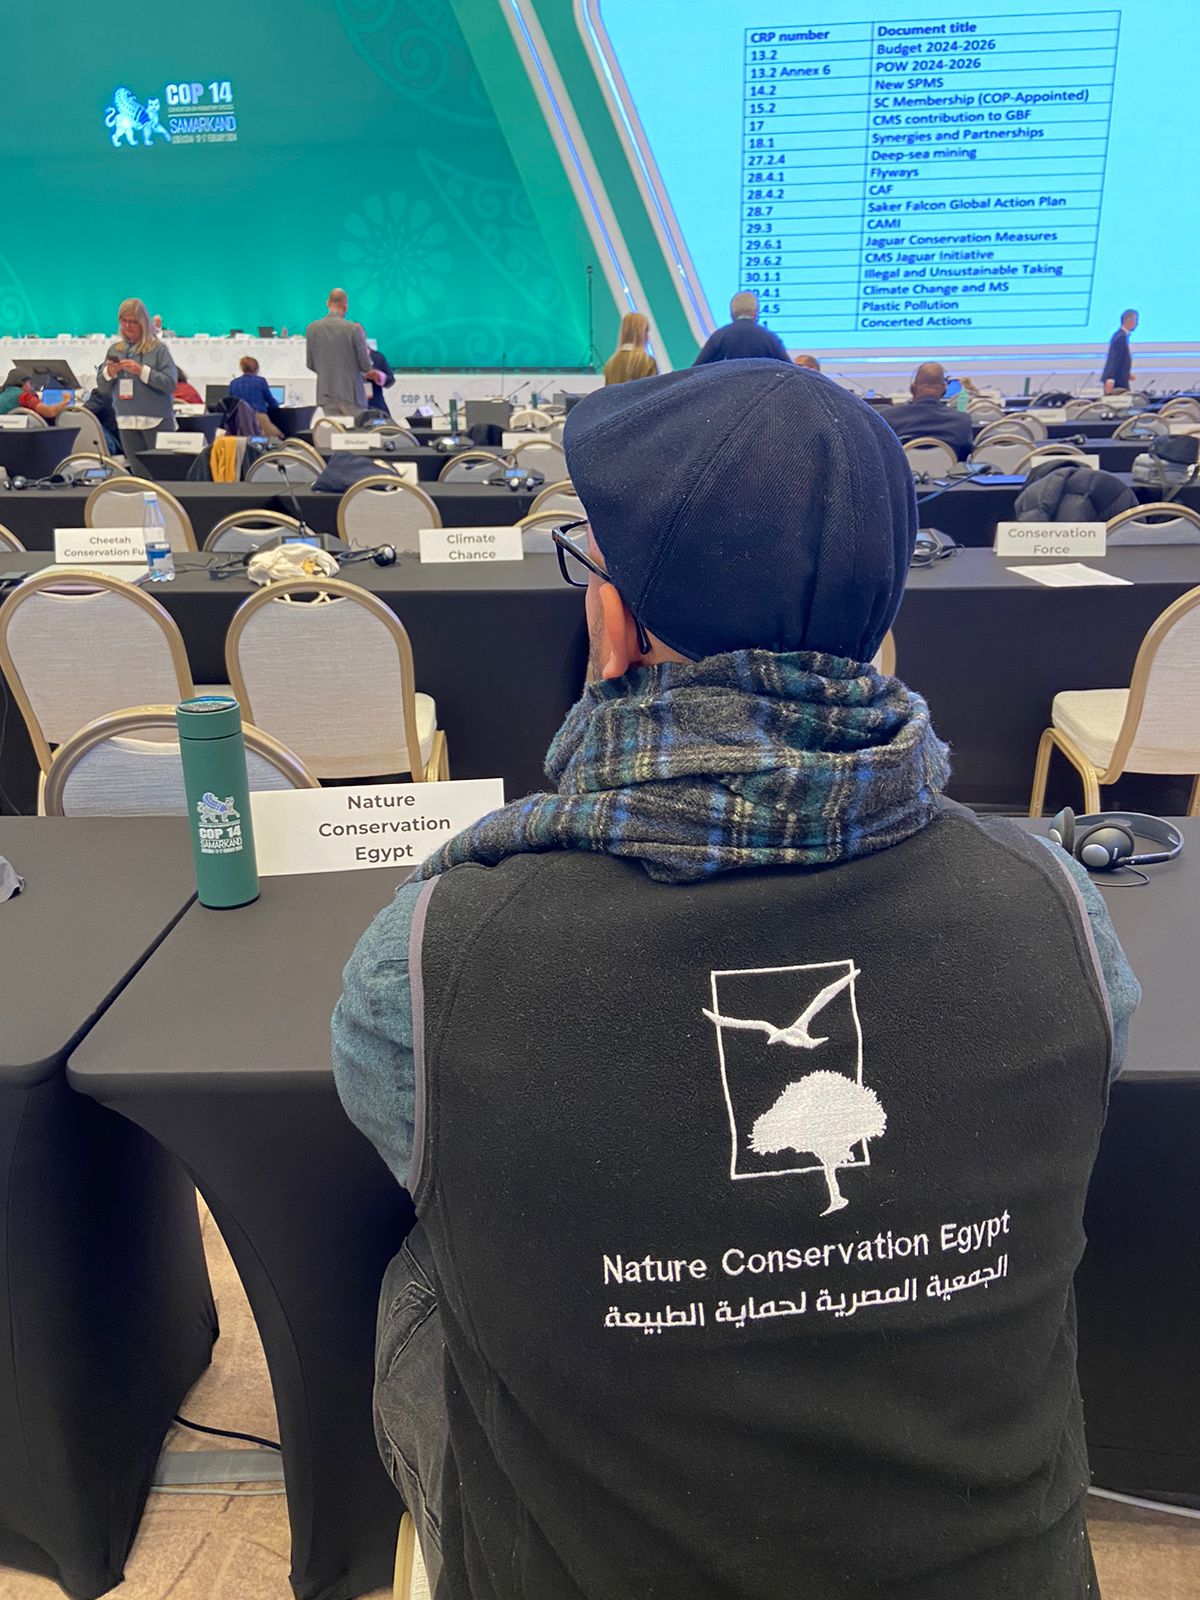 NCE participation in the Meeting of the Conference of the Parties to the Convention of the Conservation of Migratory Species (CMS) in Uzbekistan 2024